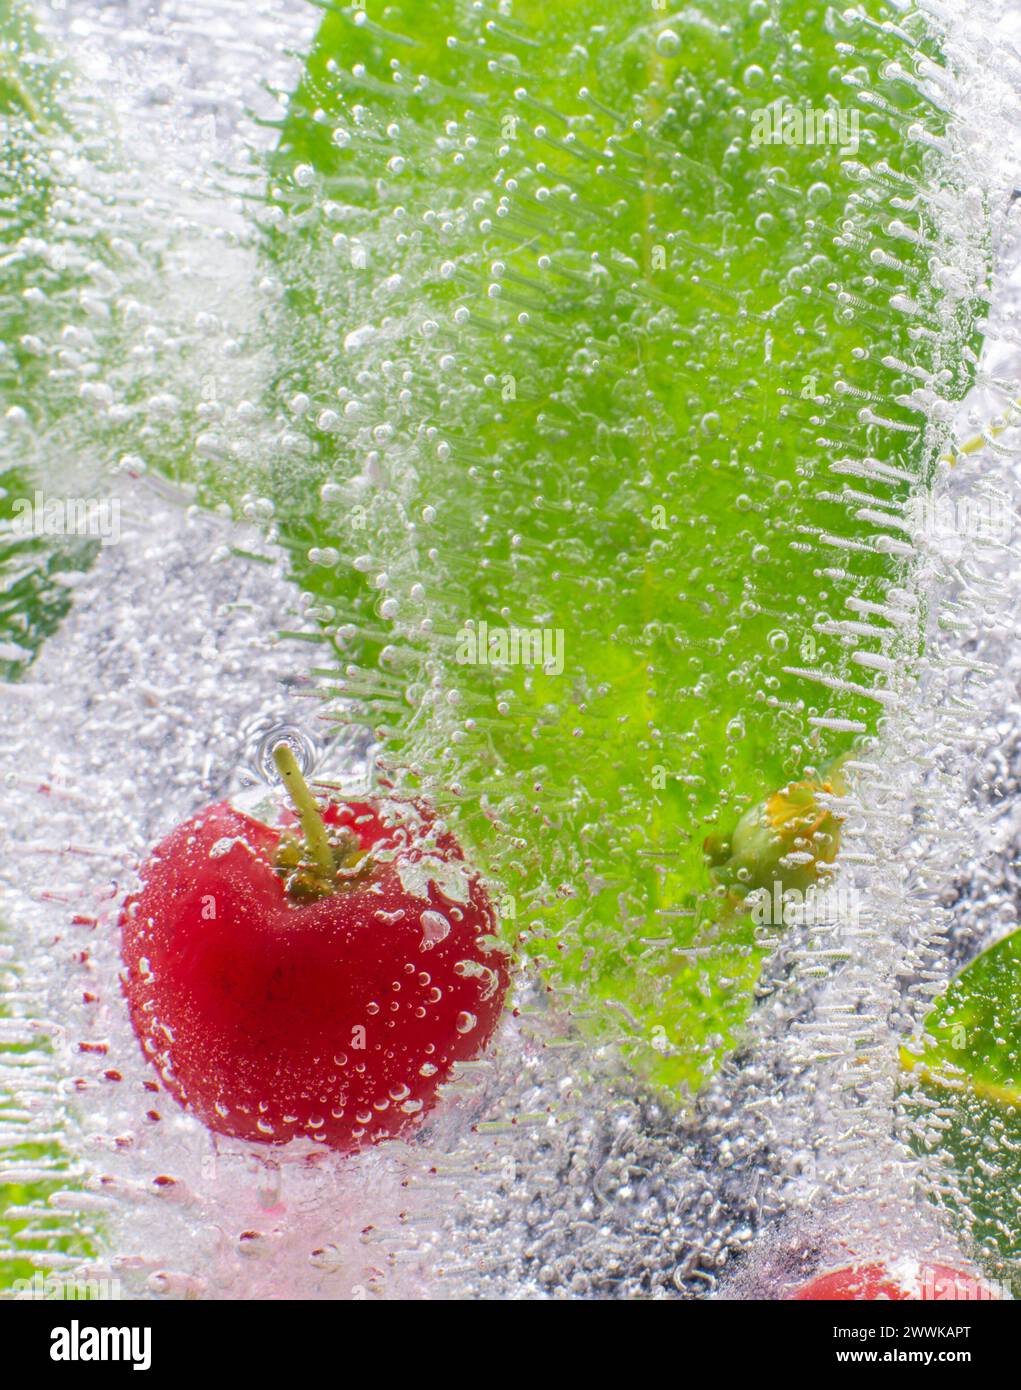 The abstract background of ice structure, Fruits, leaves, Ice, Vibrant Stock Photo